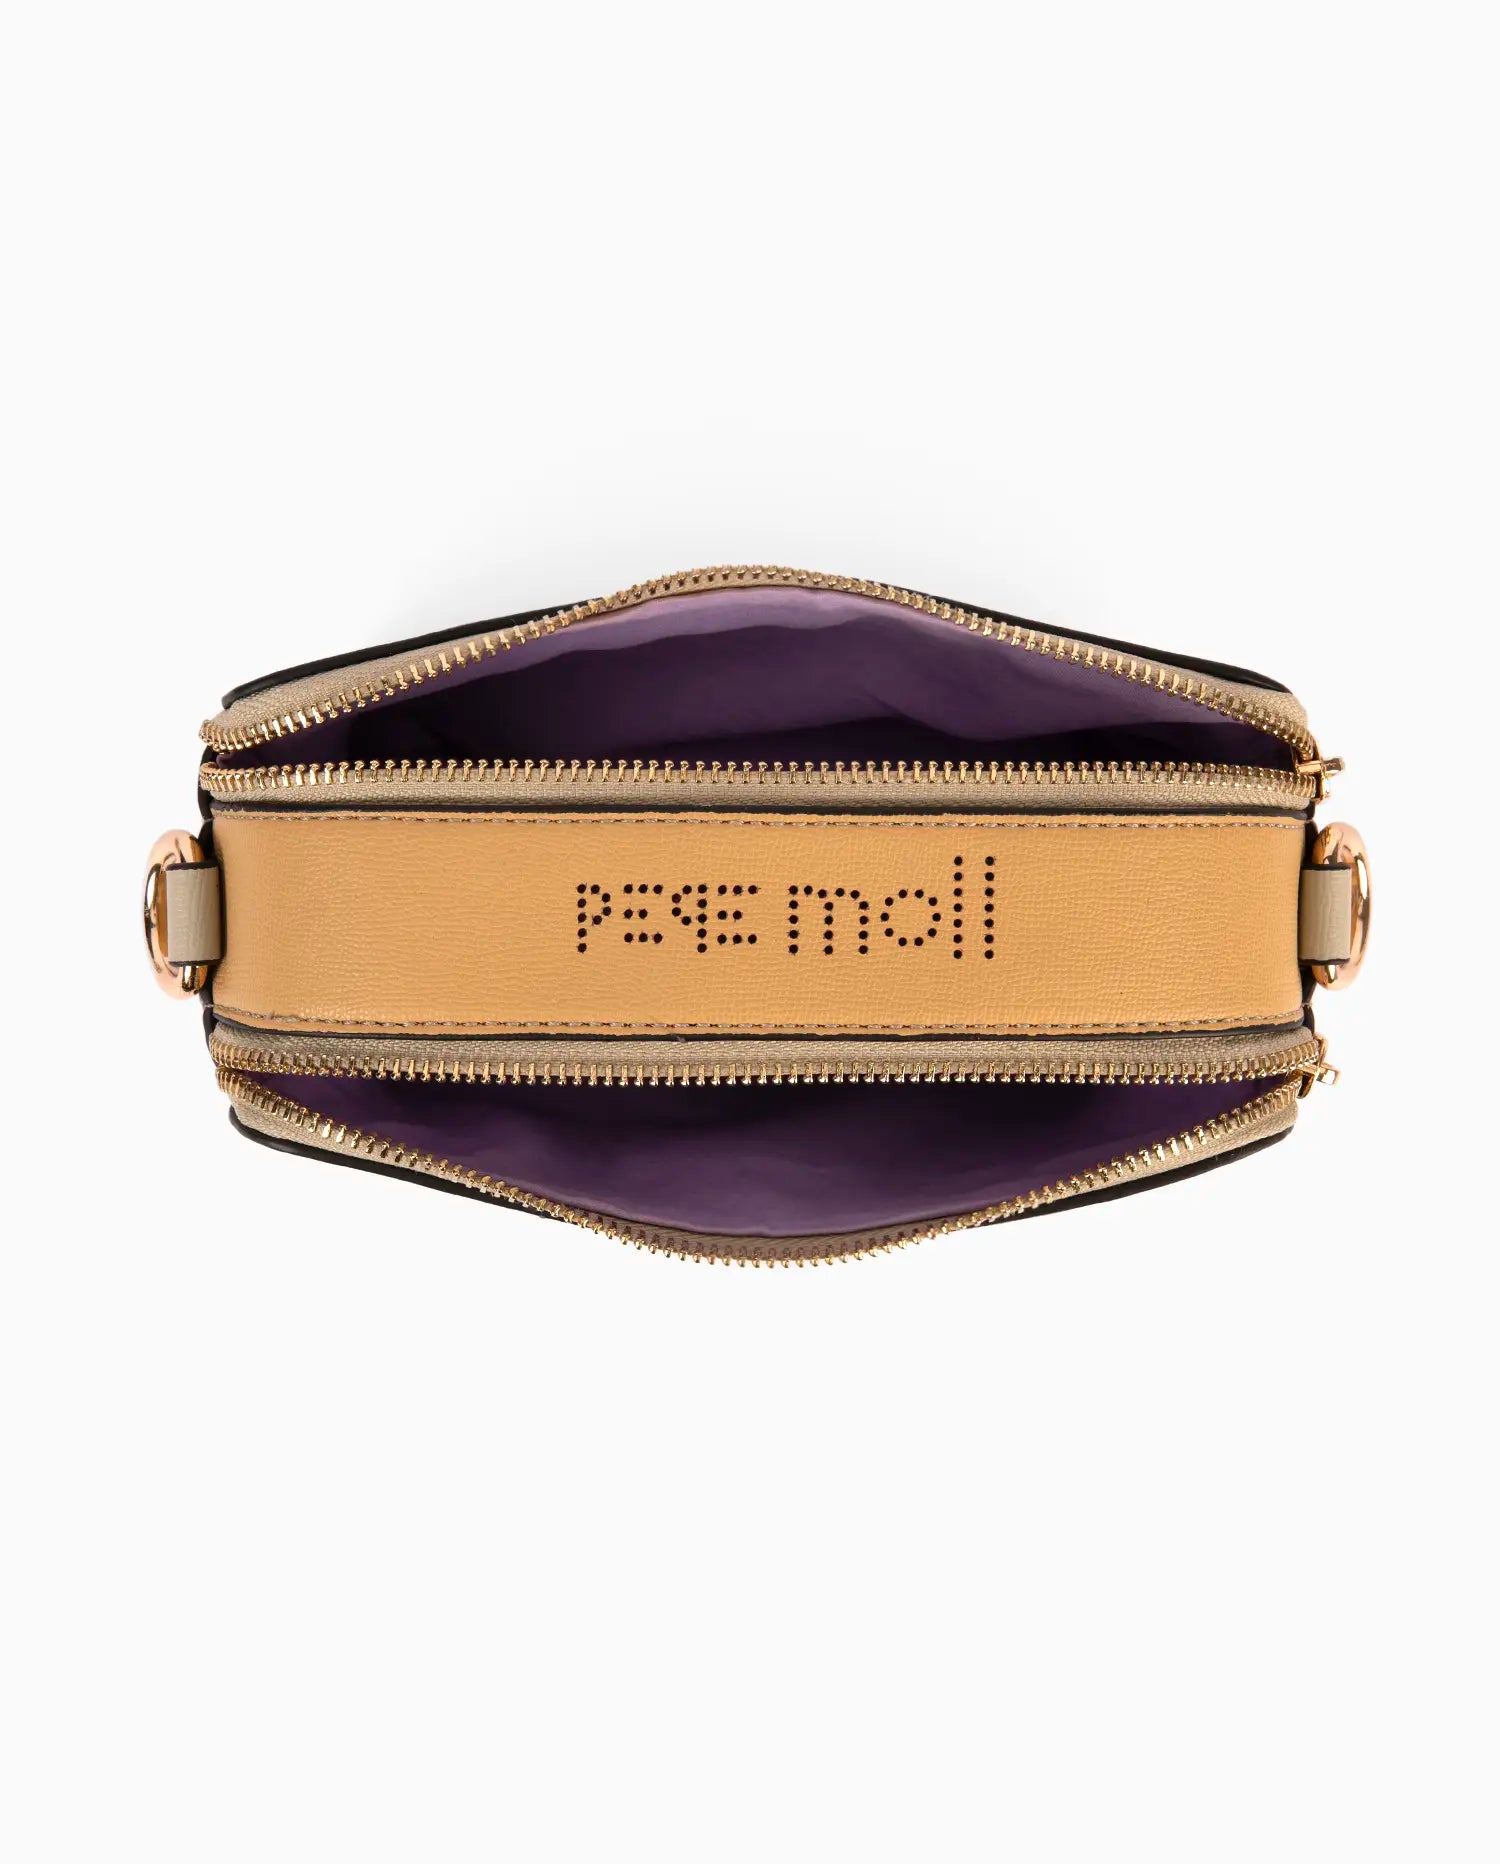  Close-up of the gold detailing on Pepe Moll Frenzy Stone-Bi Crossbody Bag 241360, adding a touch of sophistication.